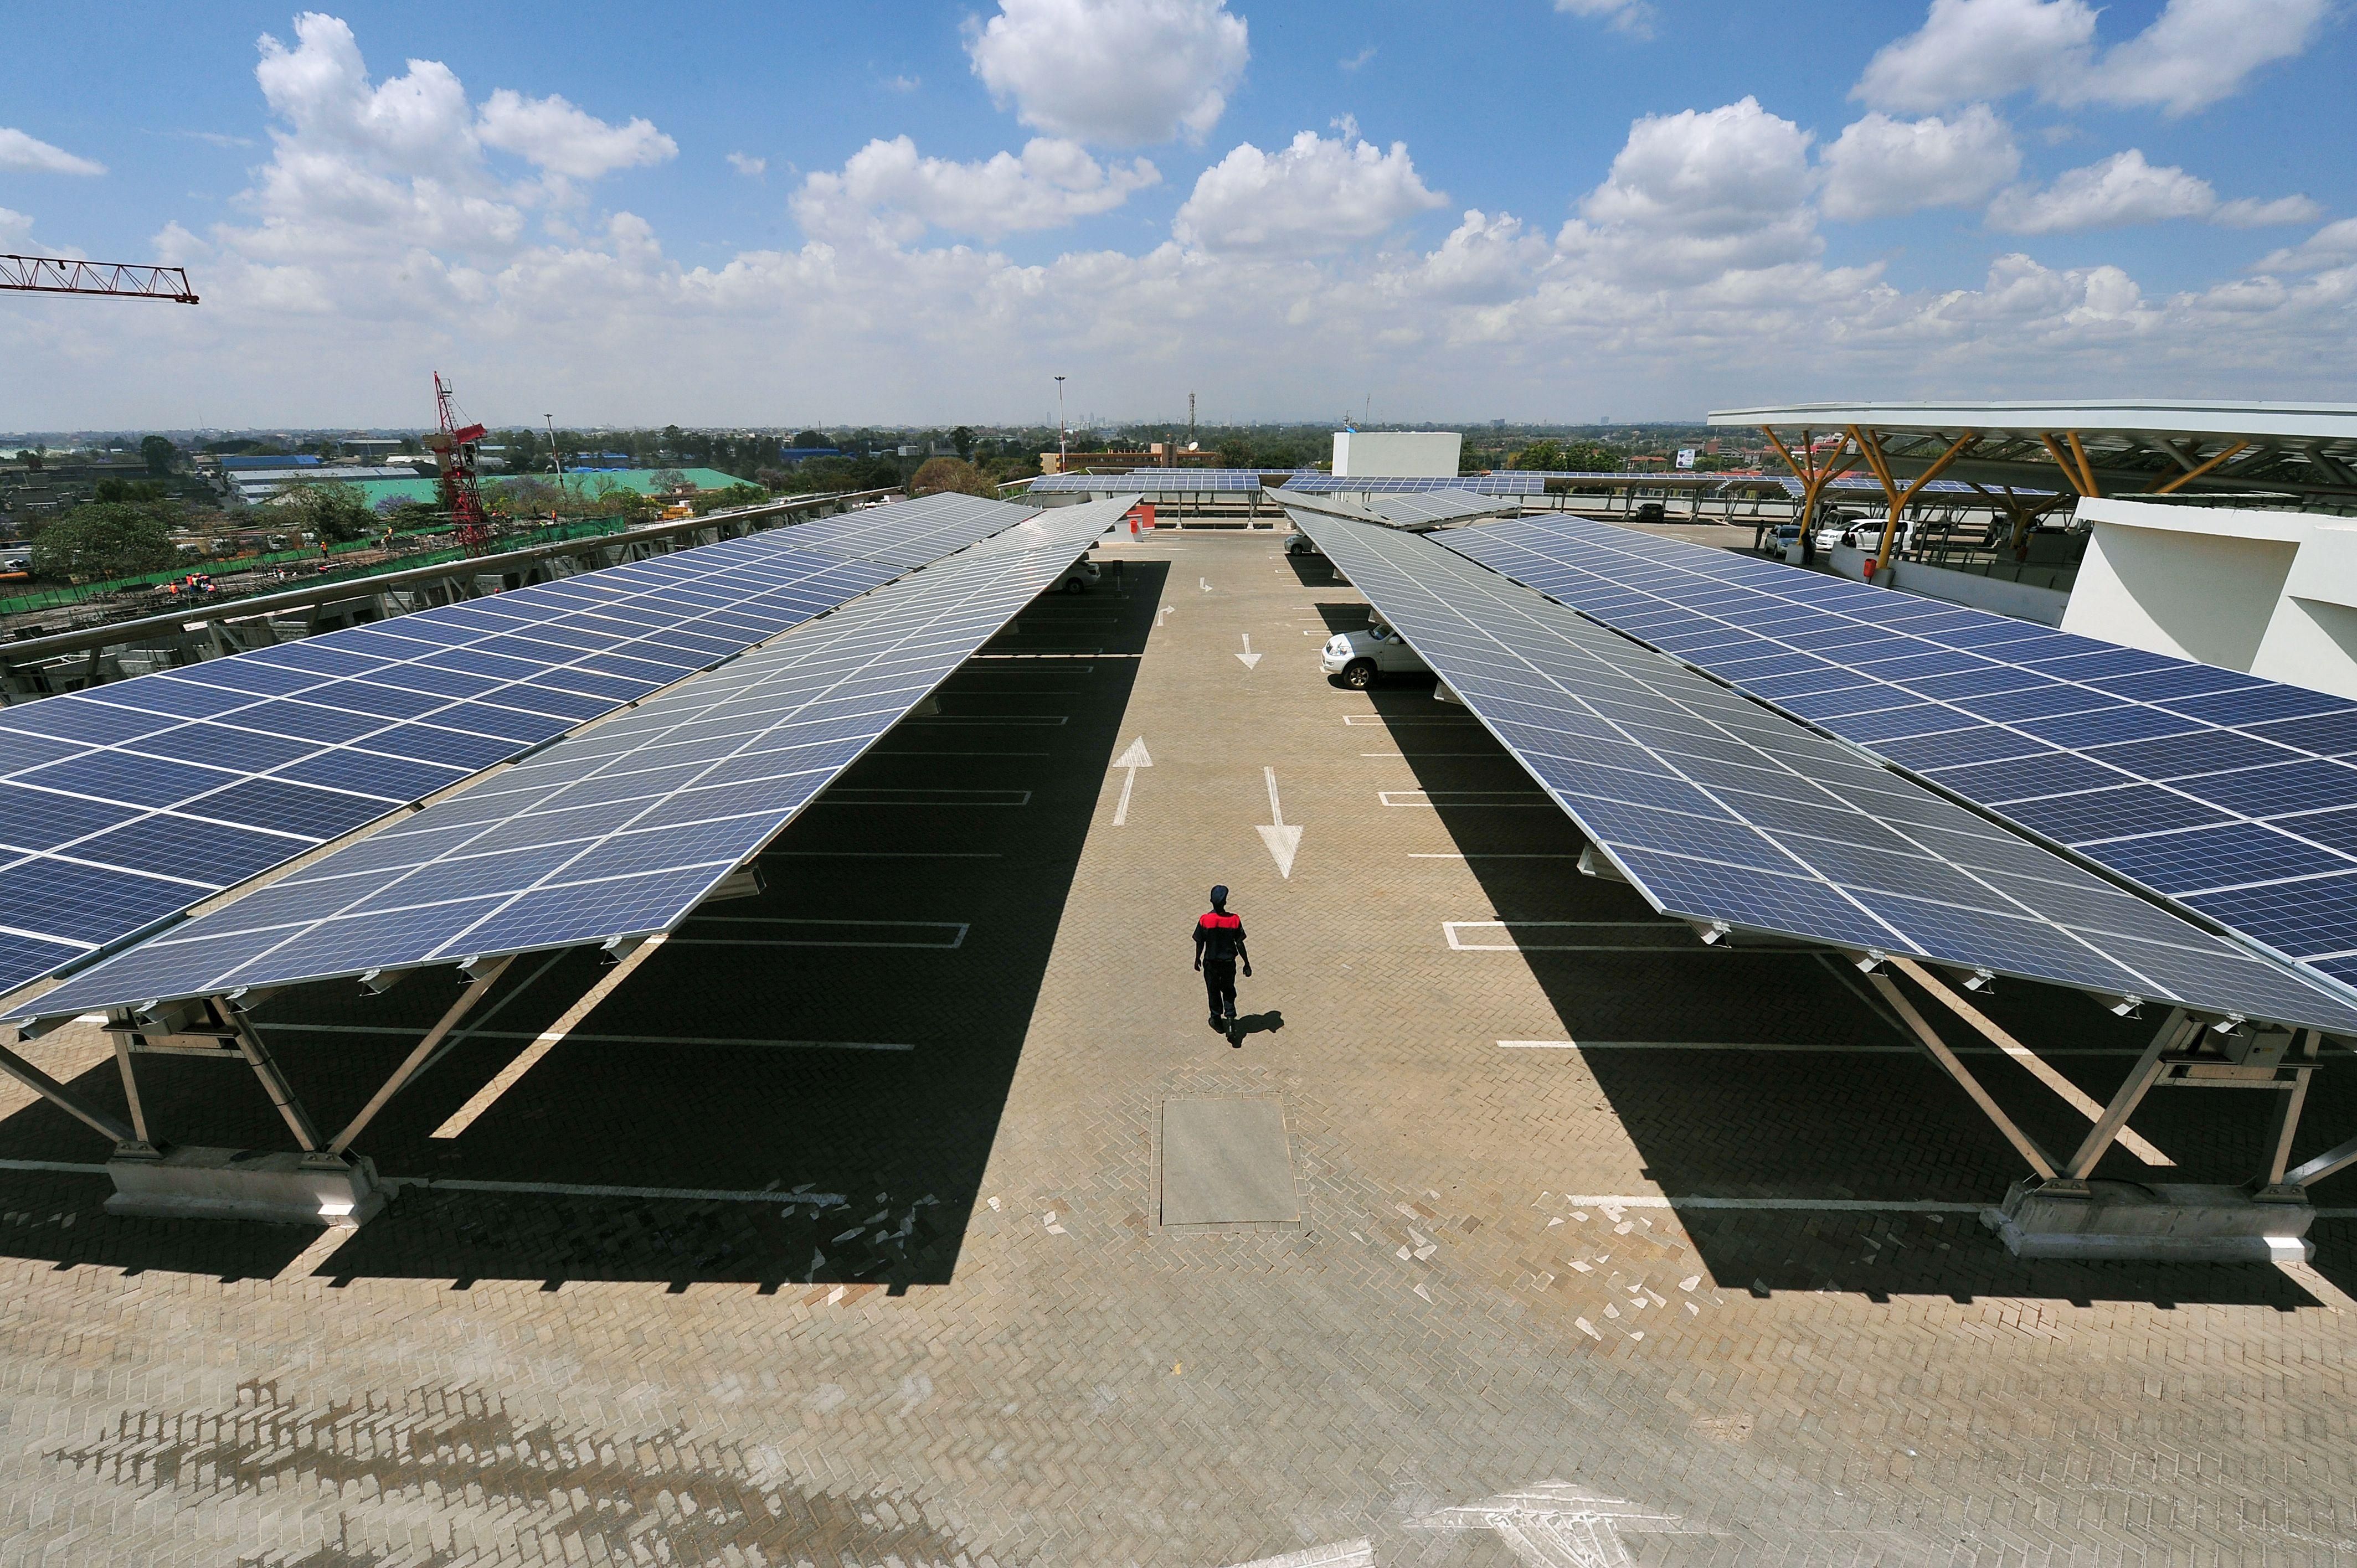 Kenyan President Says 'Wind and Solar Energy Can Power the Development of Africa'